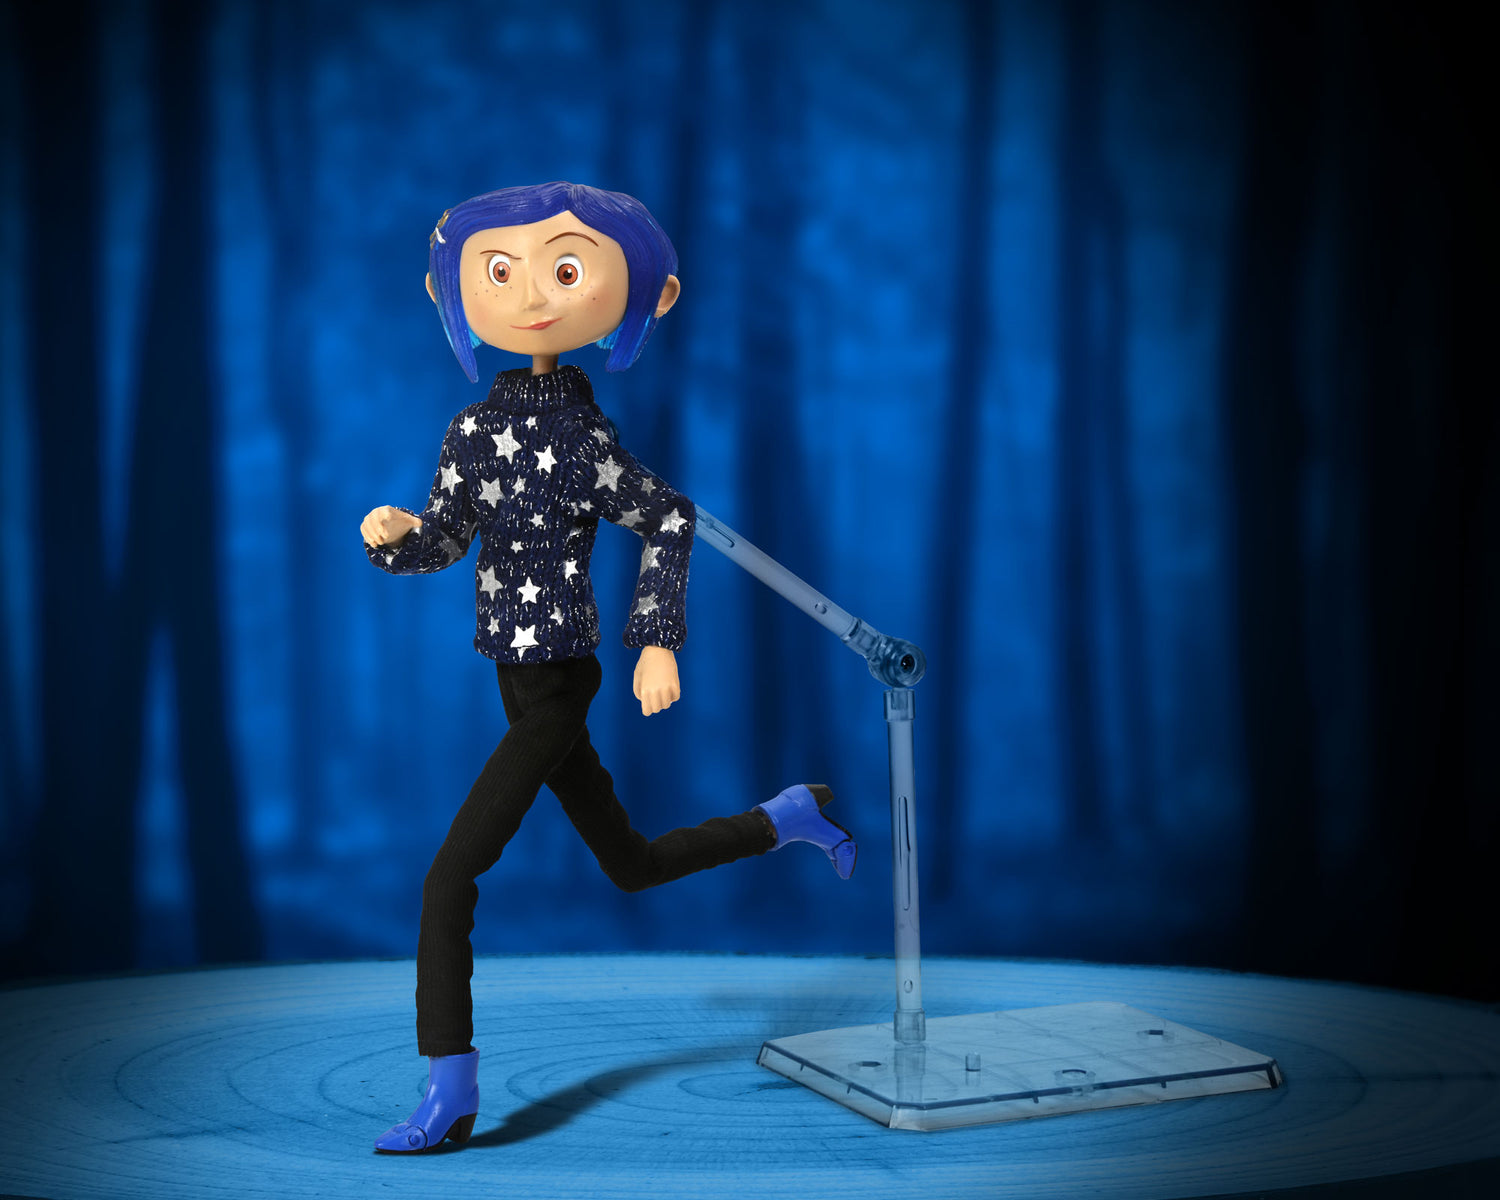 Coraline in Star Sweater 7” Articulated Figure with stylized background